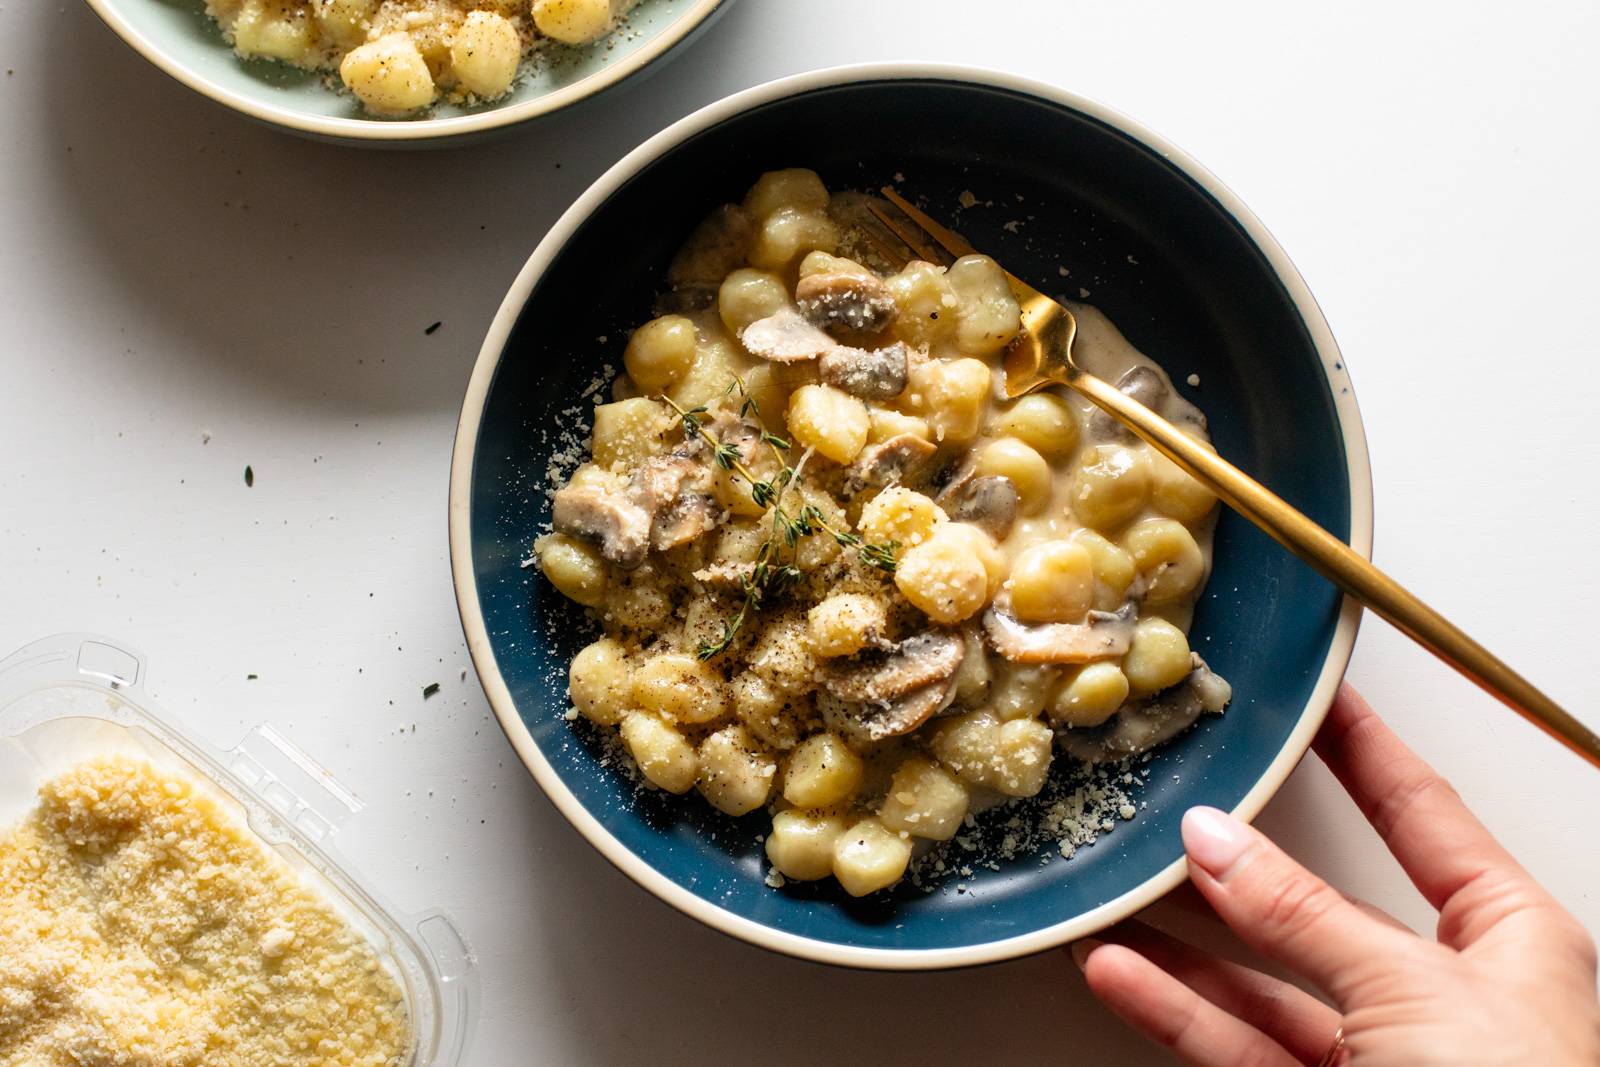 Creamy mushroom gnocchi in a bowl with parmesan sprinkled on top.